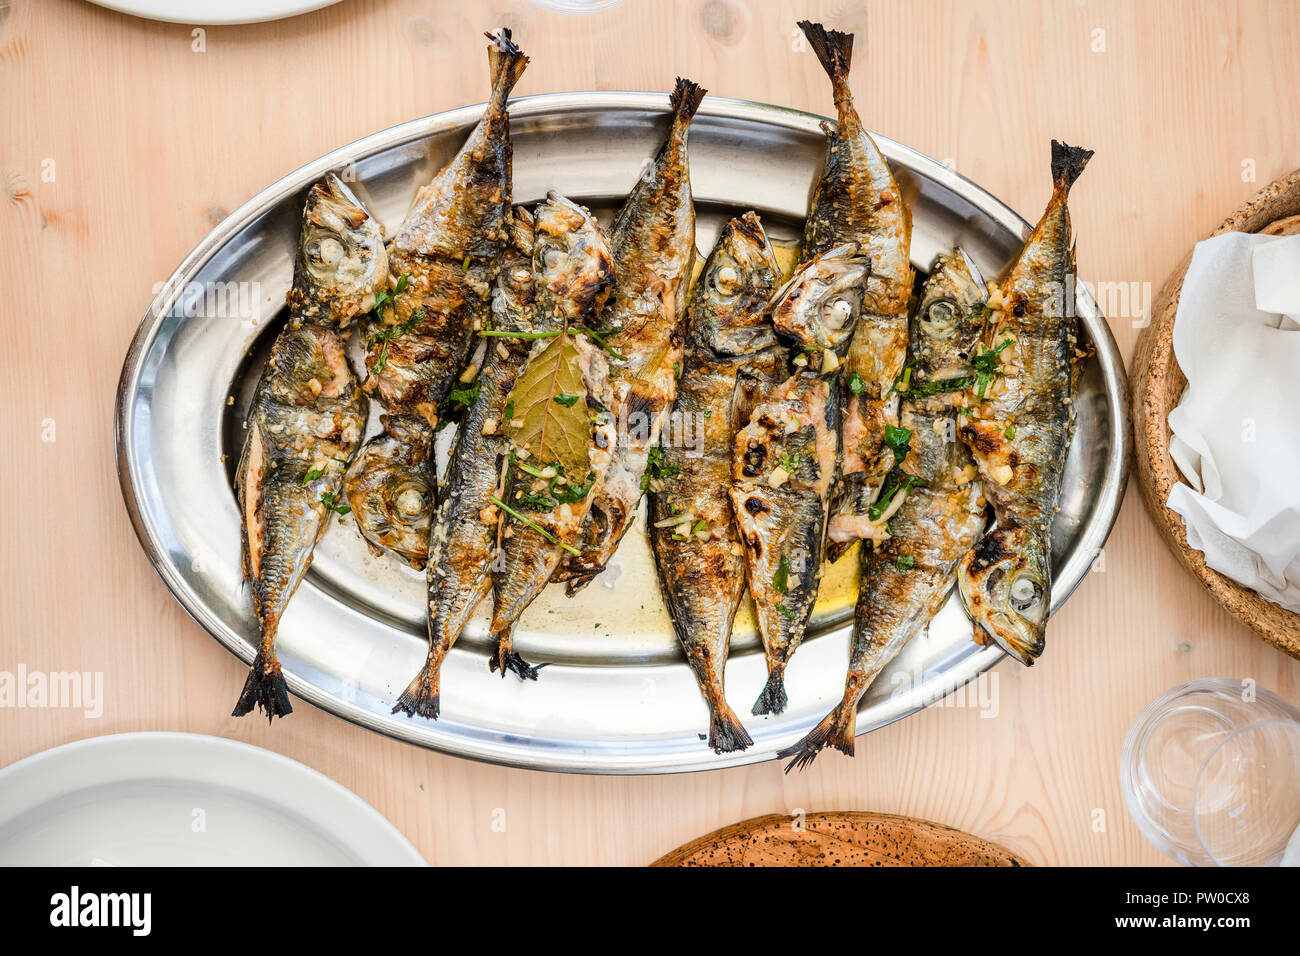 Silver Tray Full Of Delicious Fish Mackerel Known As Carapau In Portugal Stock Photo Alamy